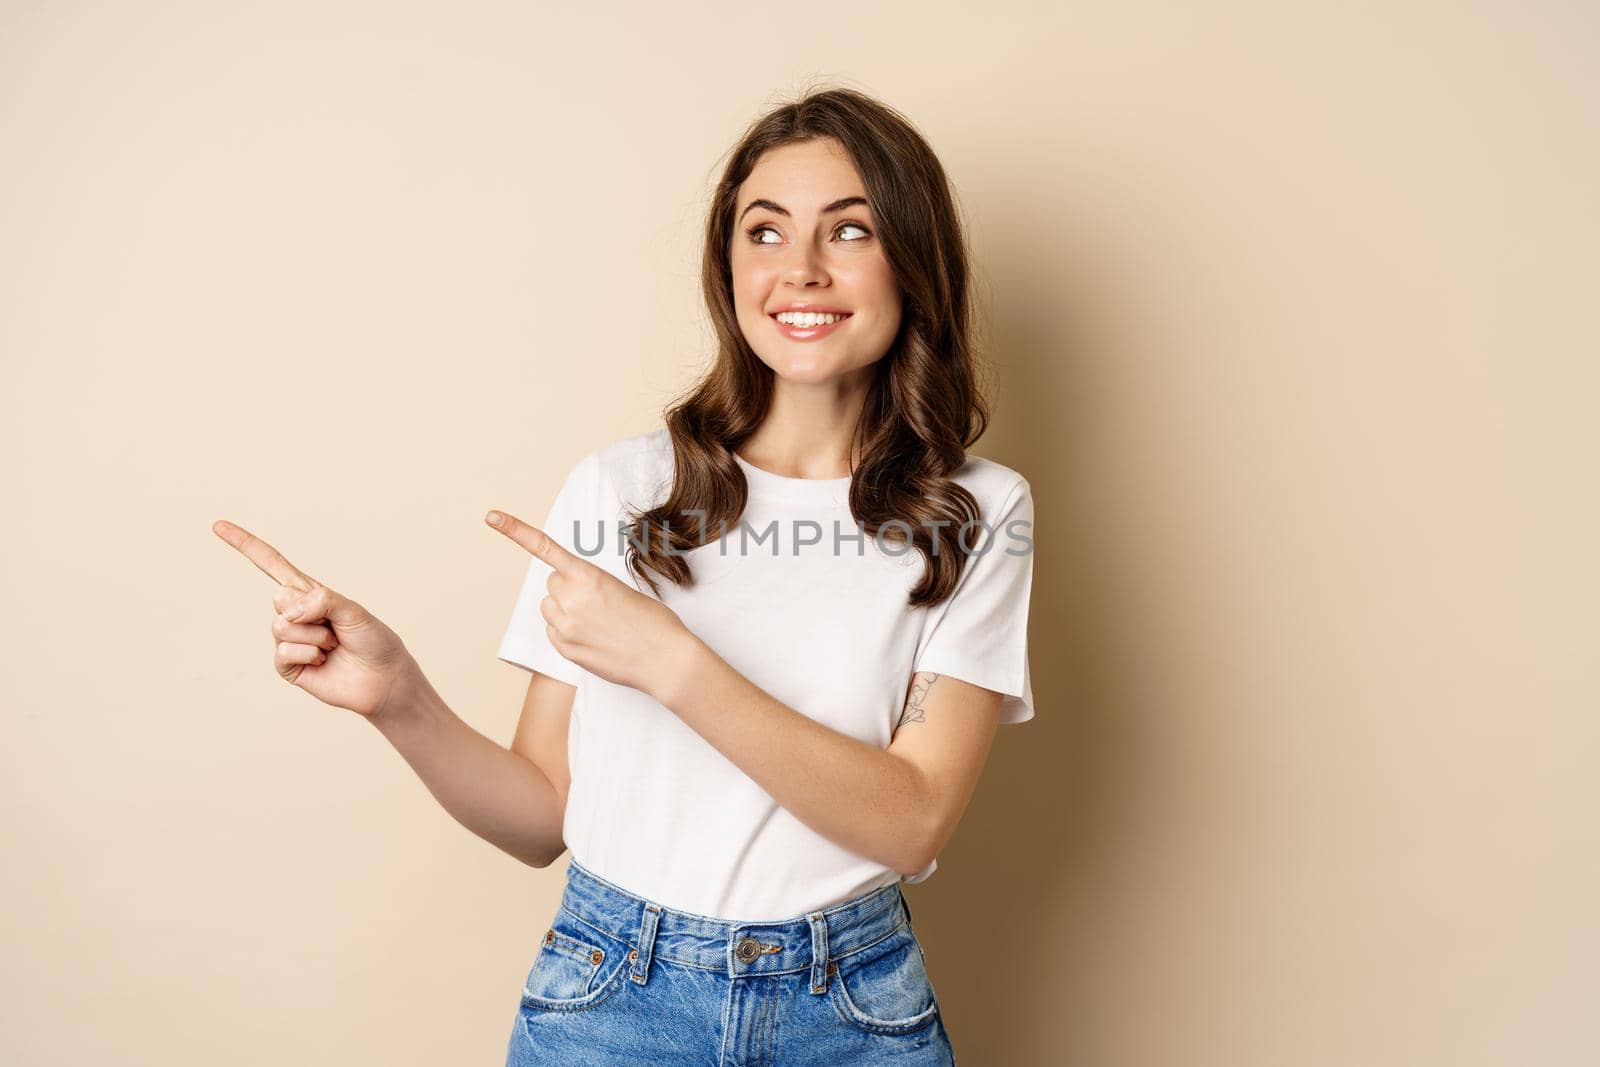 Stylish young caucasian woman smiling, pointing fingers left, showing advertisement, promo offer, standing against beige background.